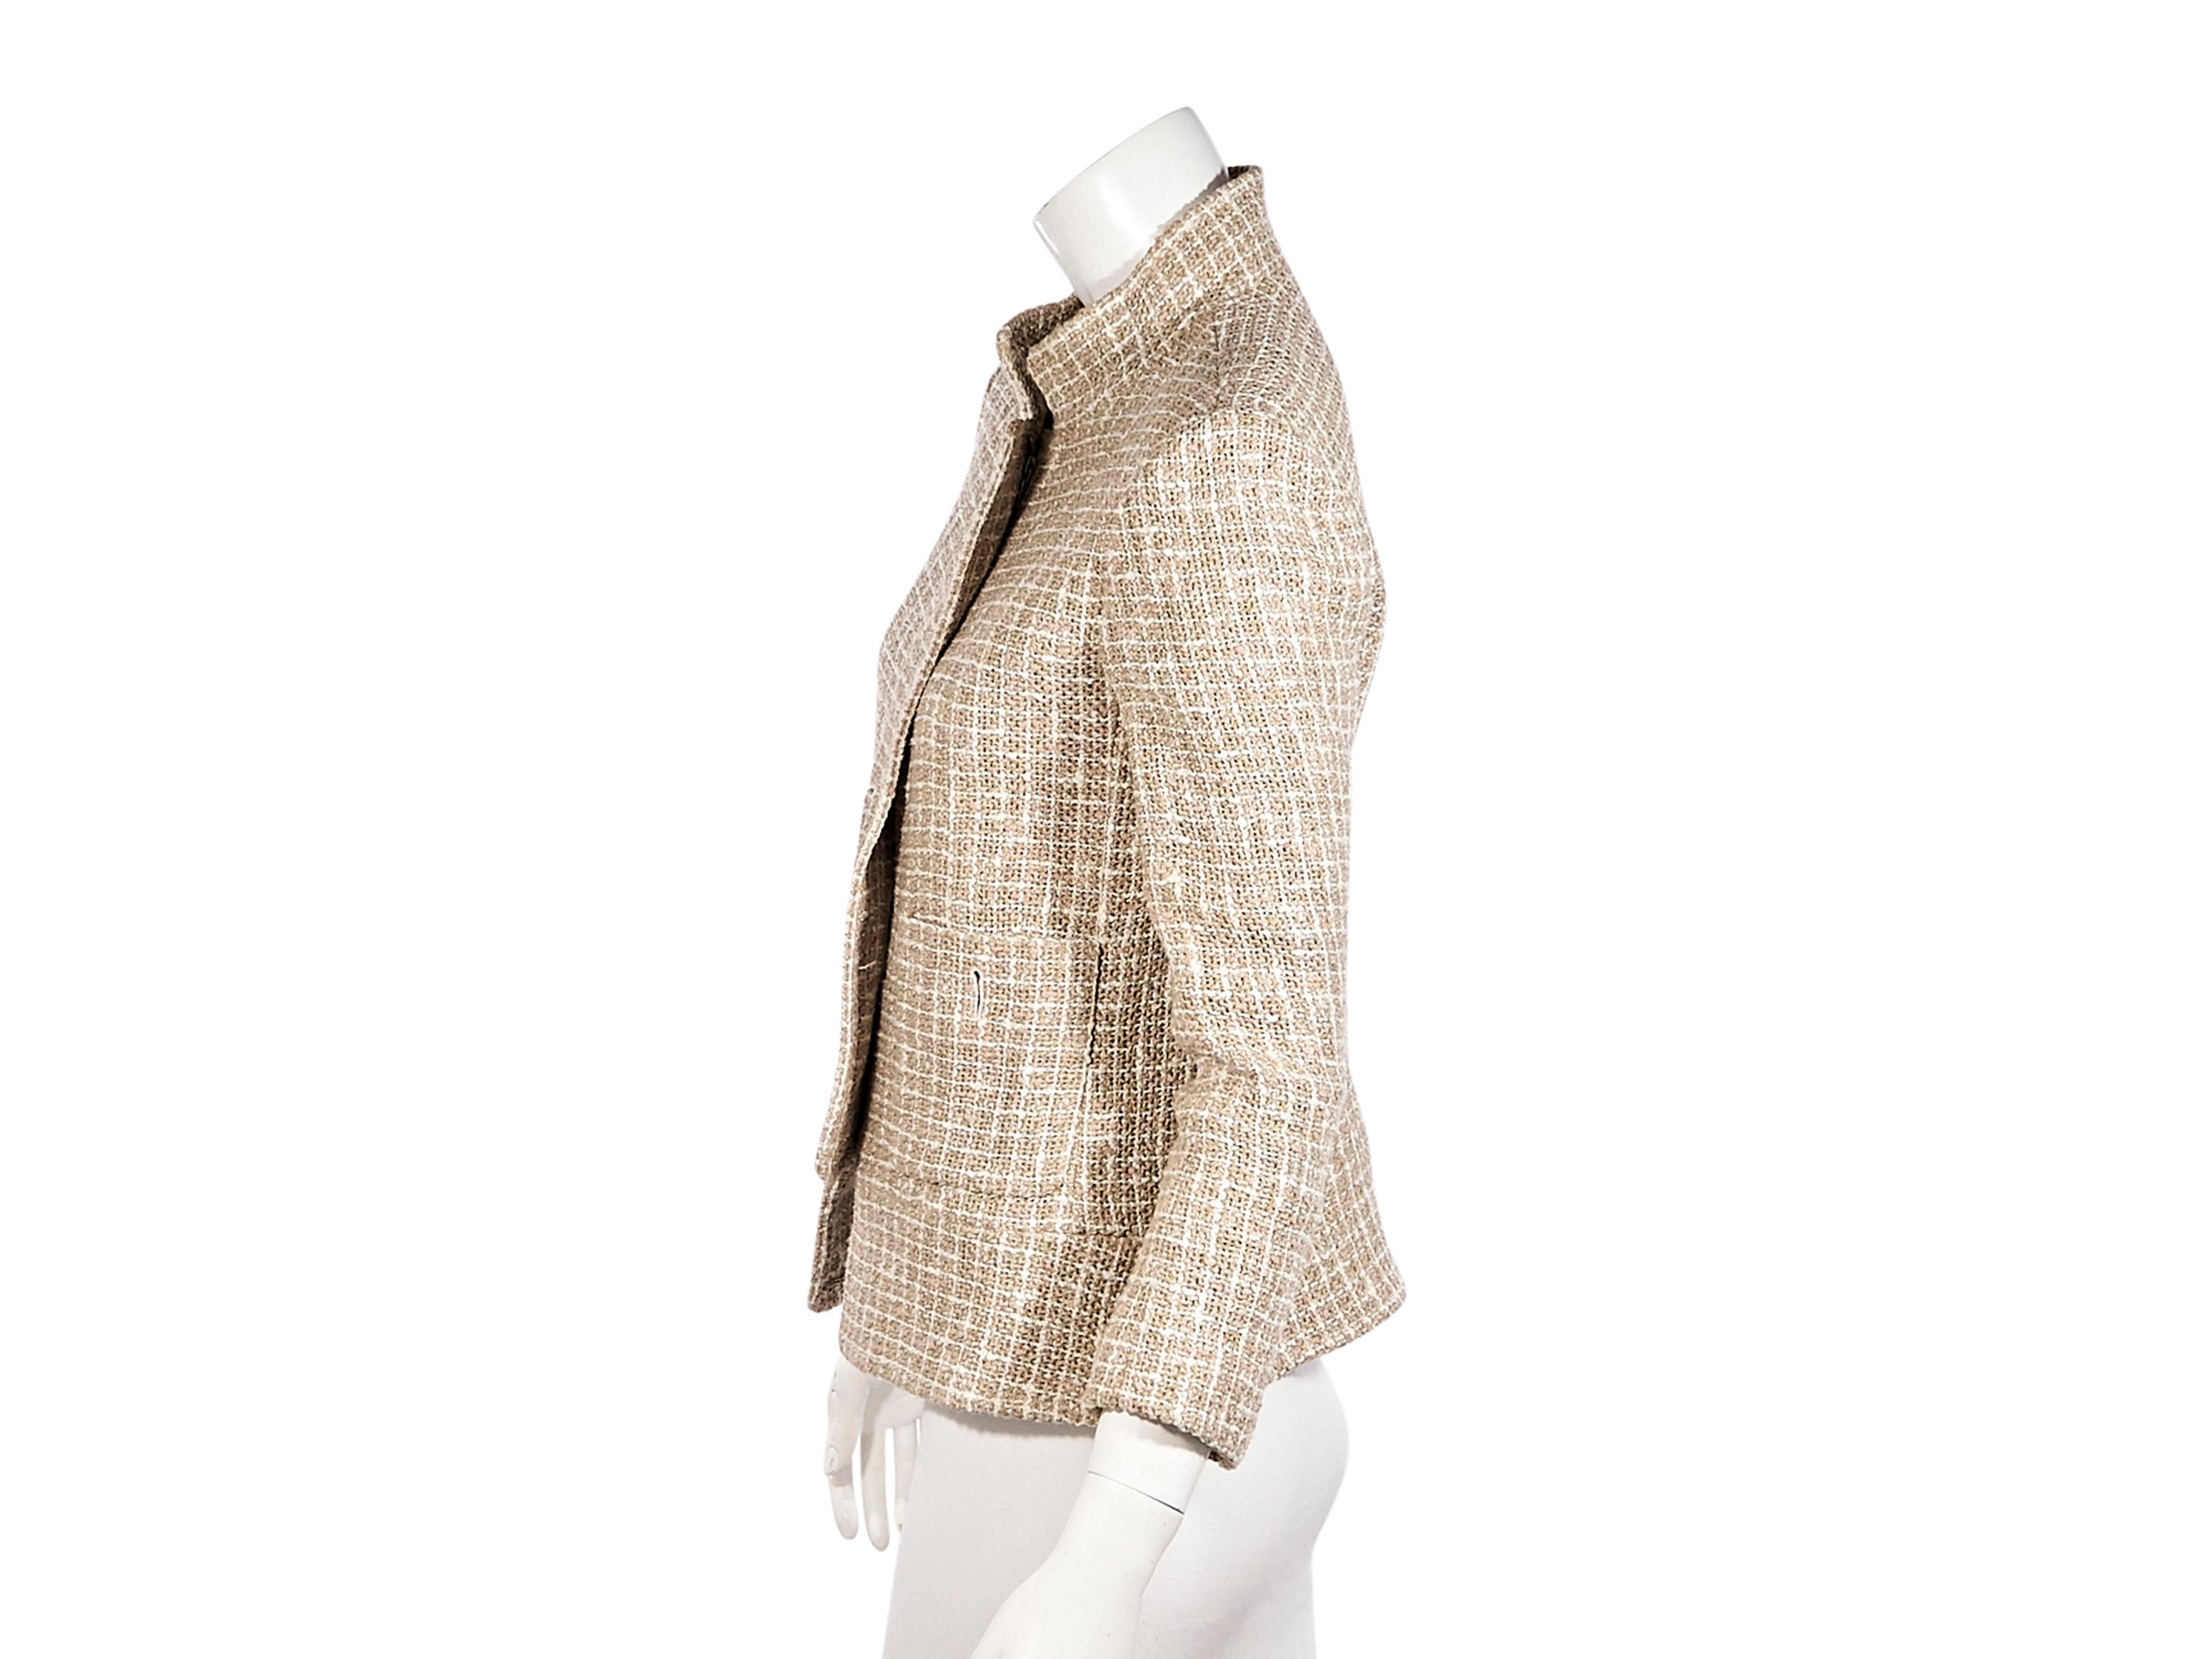 Product details:  Tan and white tweed jacket by Chanel. High collar.  Cropped sleeves. Concealed zip-front closure.  Dual pockets at front. Silver-tone hardware. Wear layered over a white-T-shirt and wide-leg jeans. 31